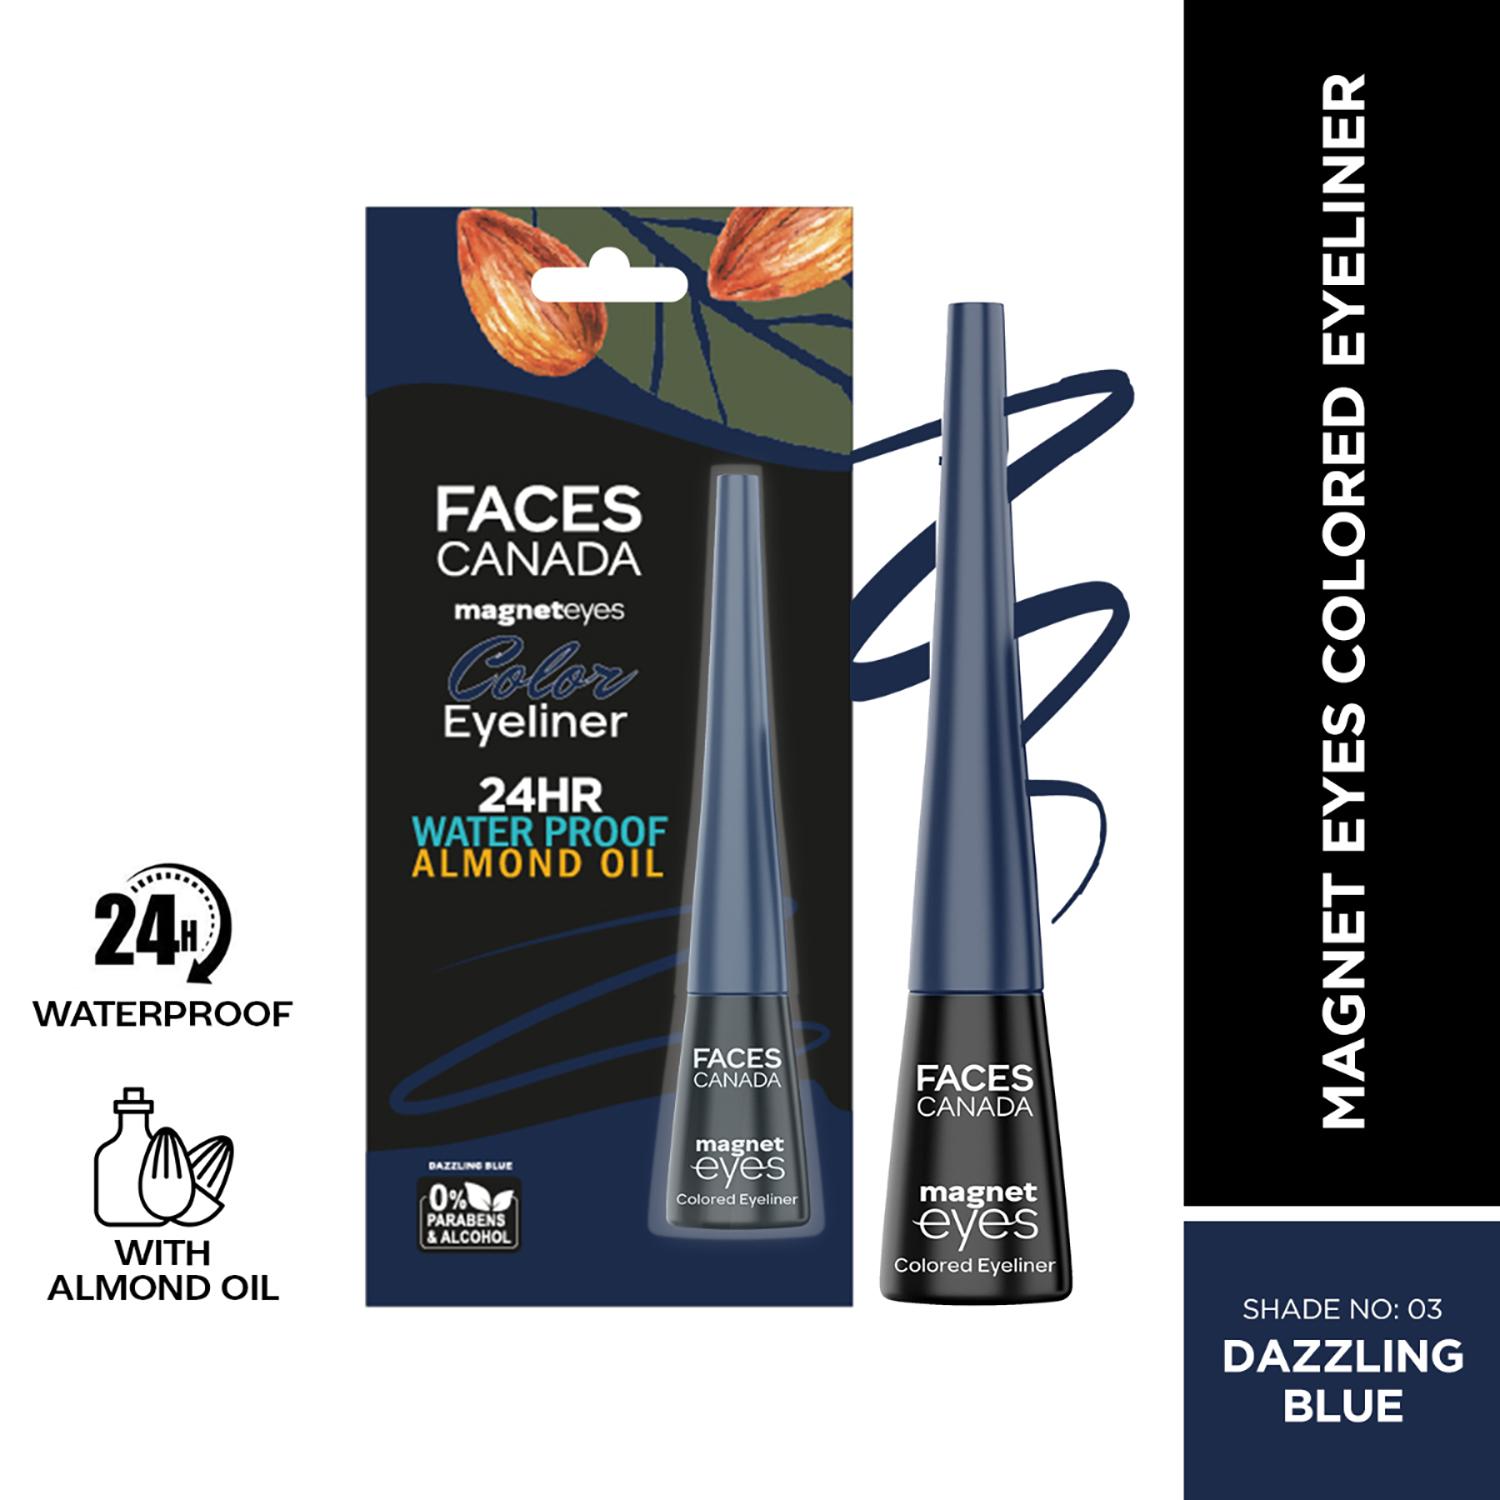 Faces Canada | Faces Canada Magneteyes Color Eyeliner, Glossy Finish, 24HR Long-lasting - Dazzling Blue (4 ml)